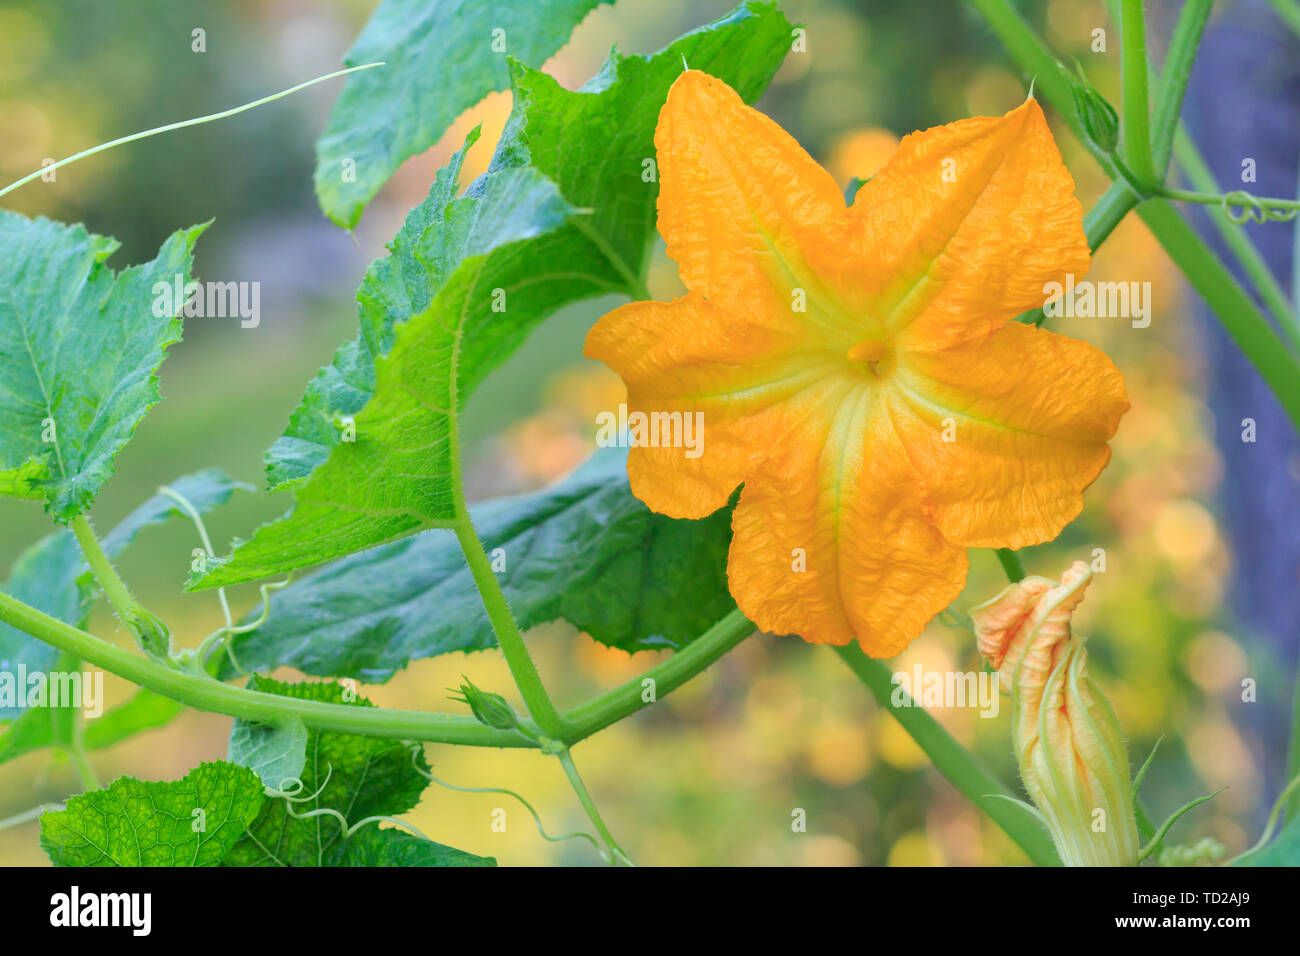 Flower of vegetable marrow growing on bush. Zucchini plant and flower in the garden. Stock Photo